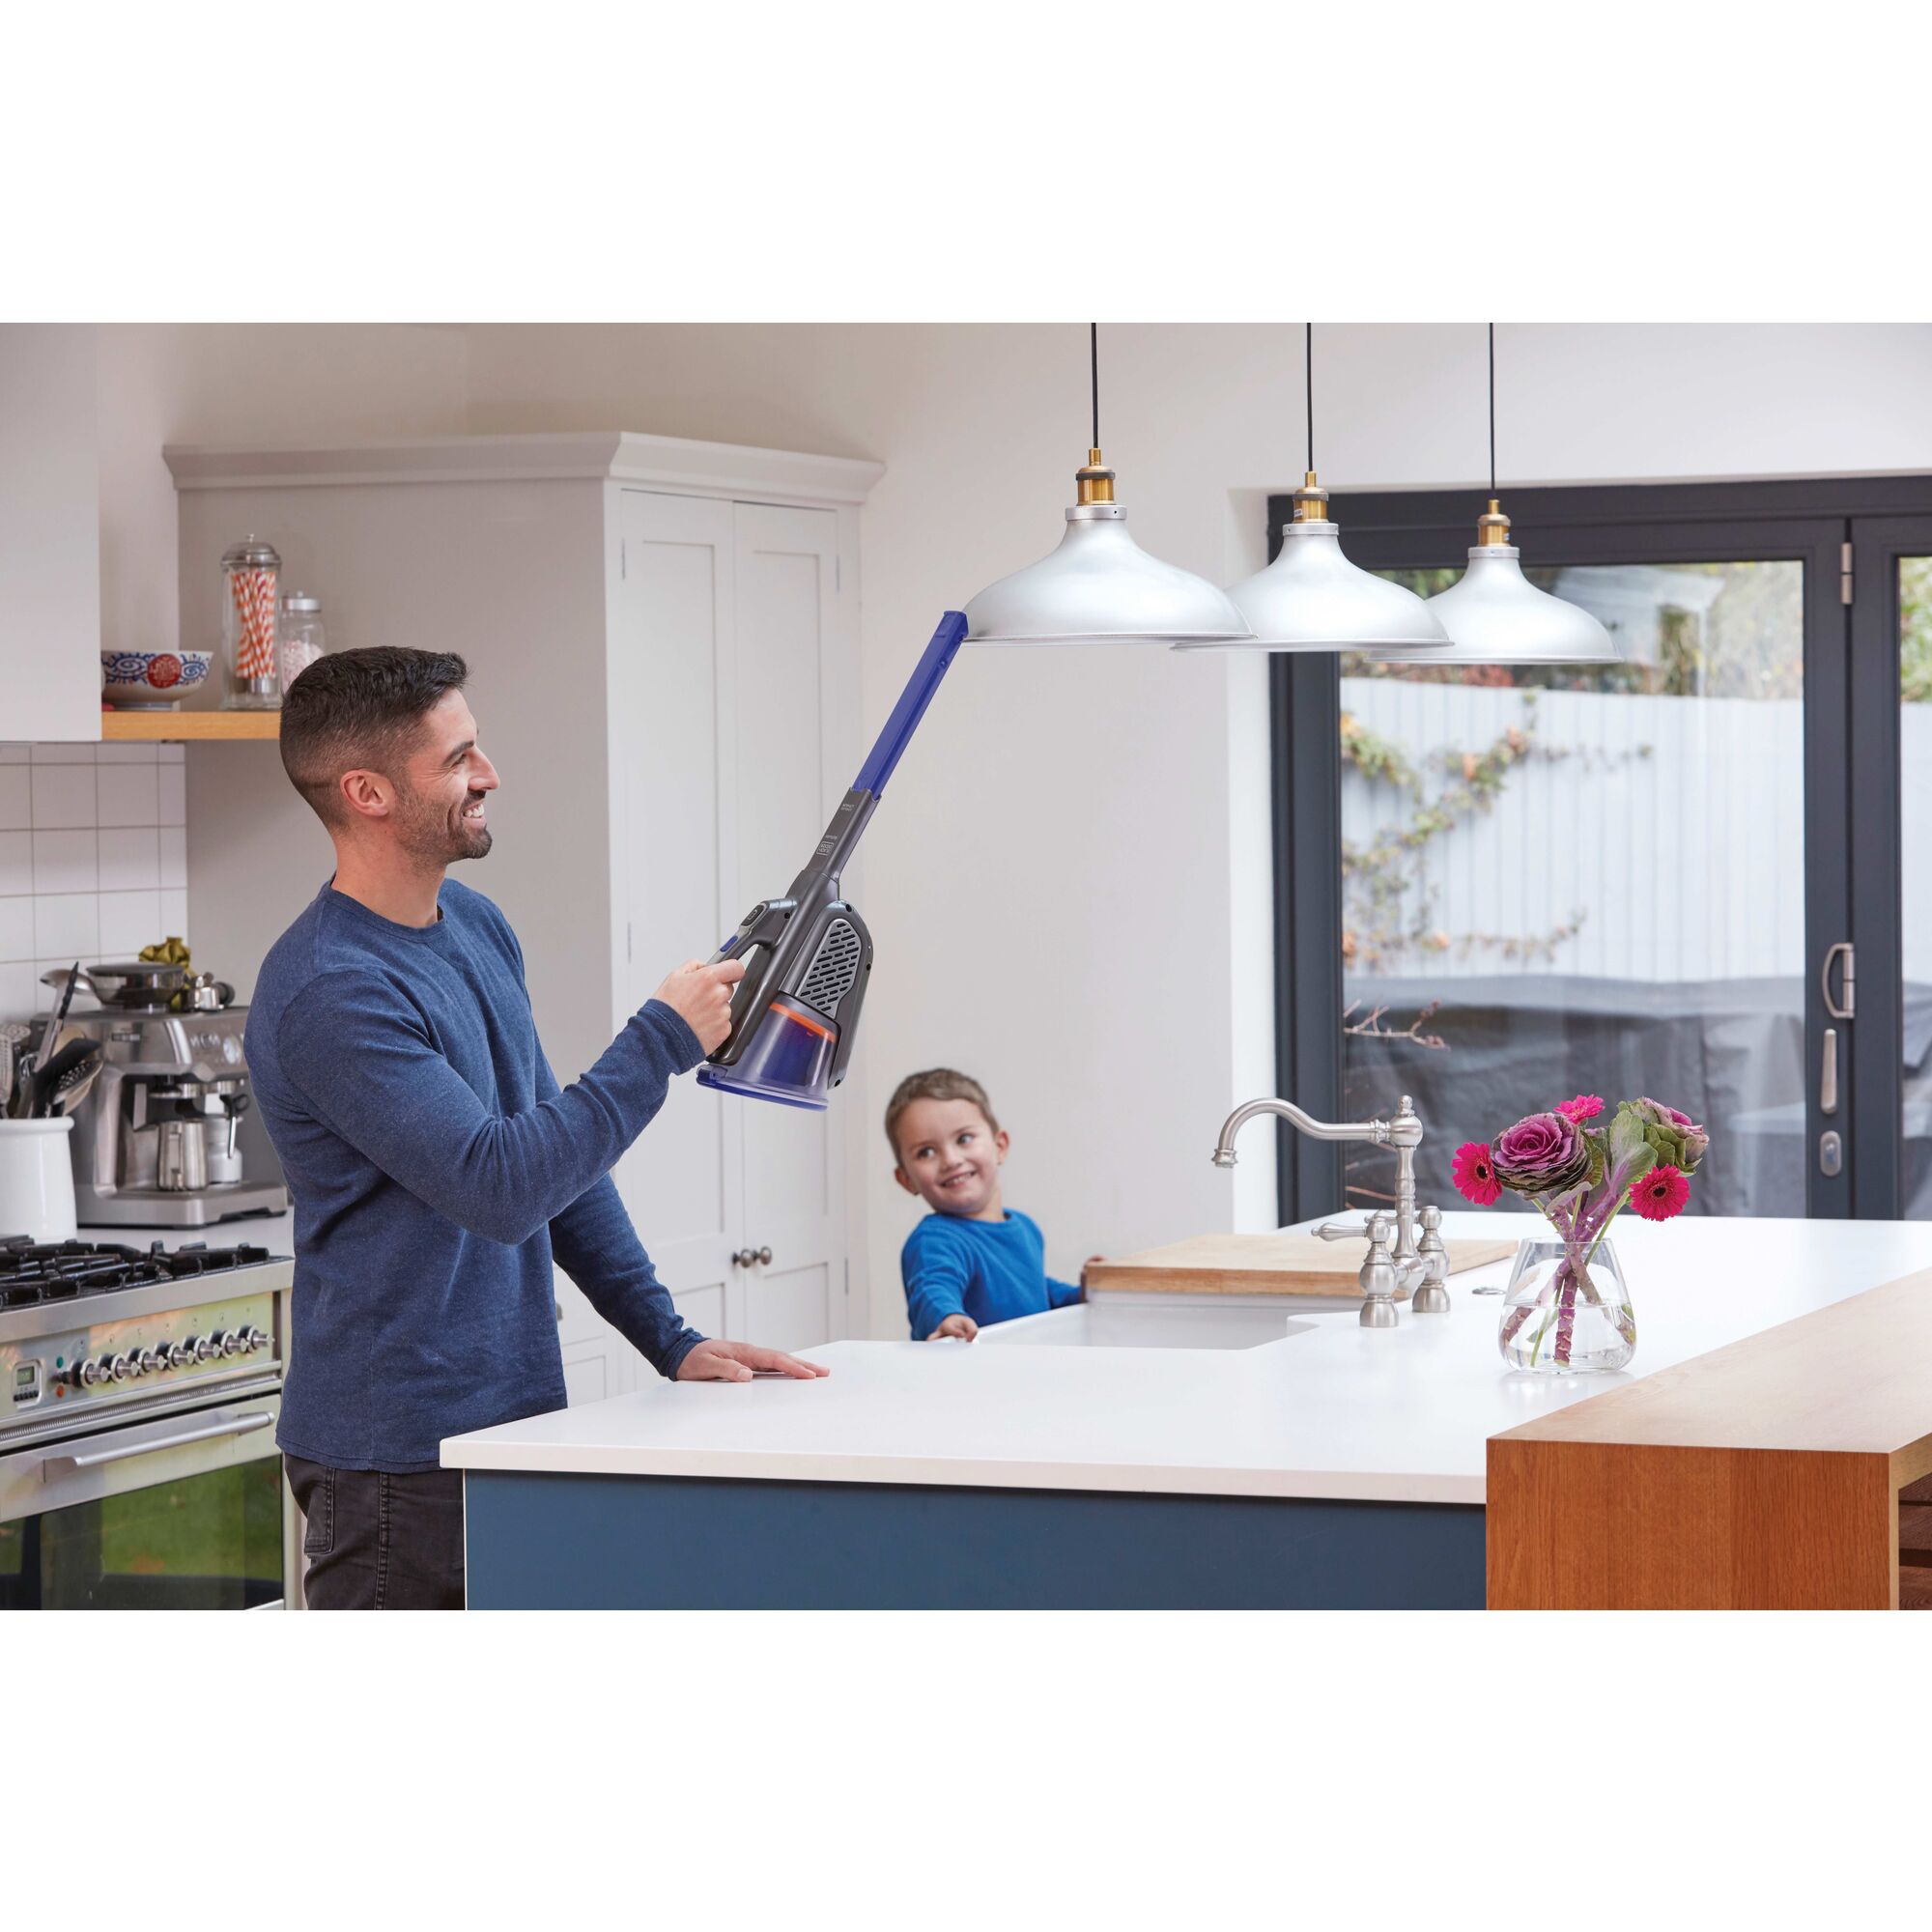 dustbuster AdvancedClean pet cordless hand vacuum being used by a person to clean hanging light shades.